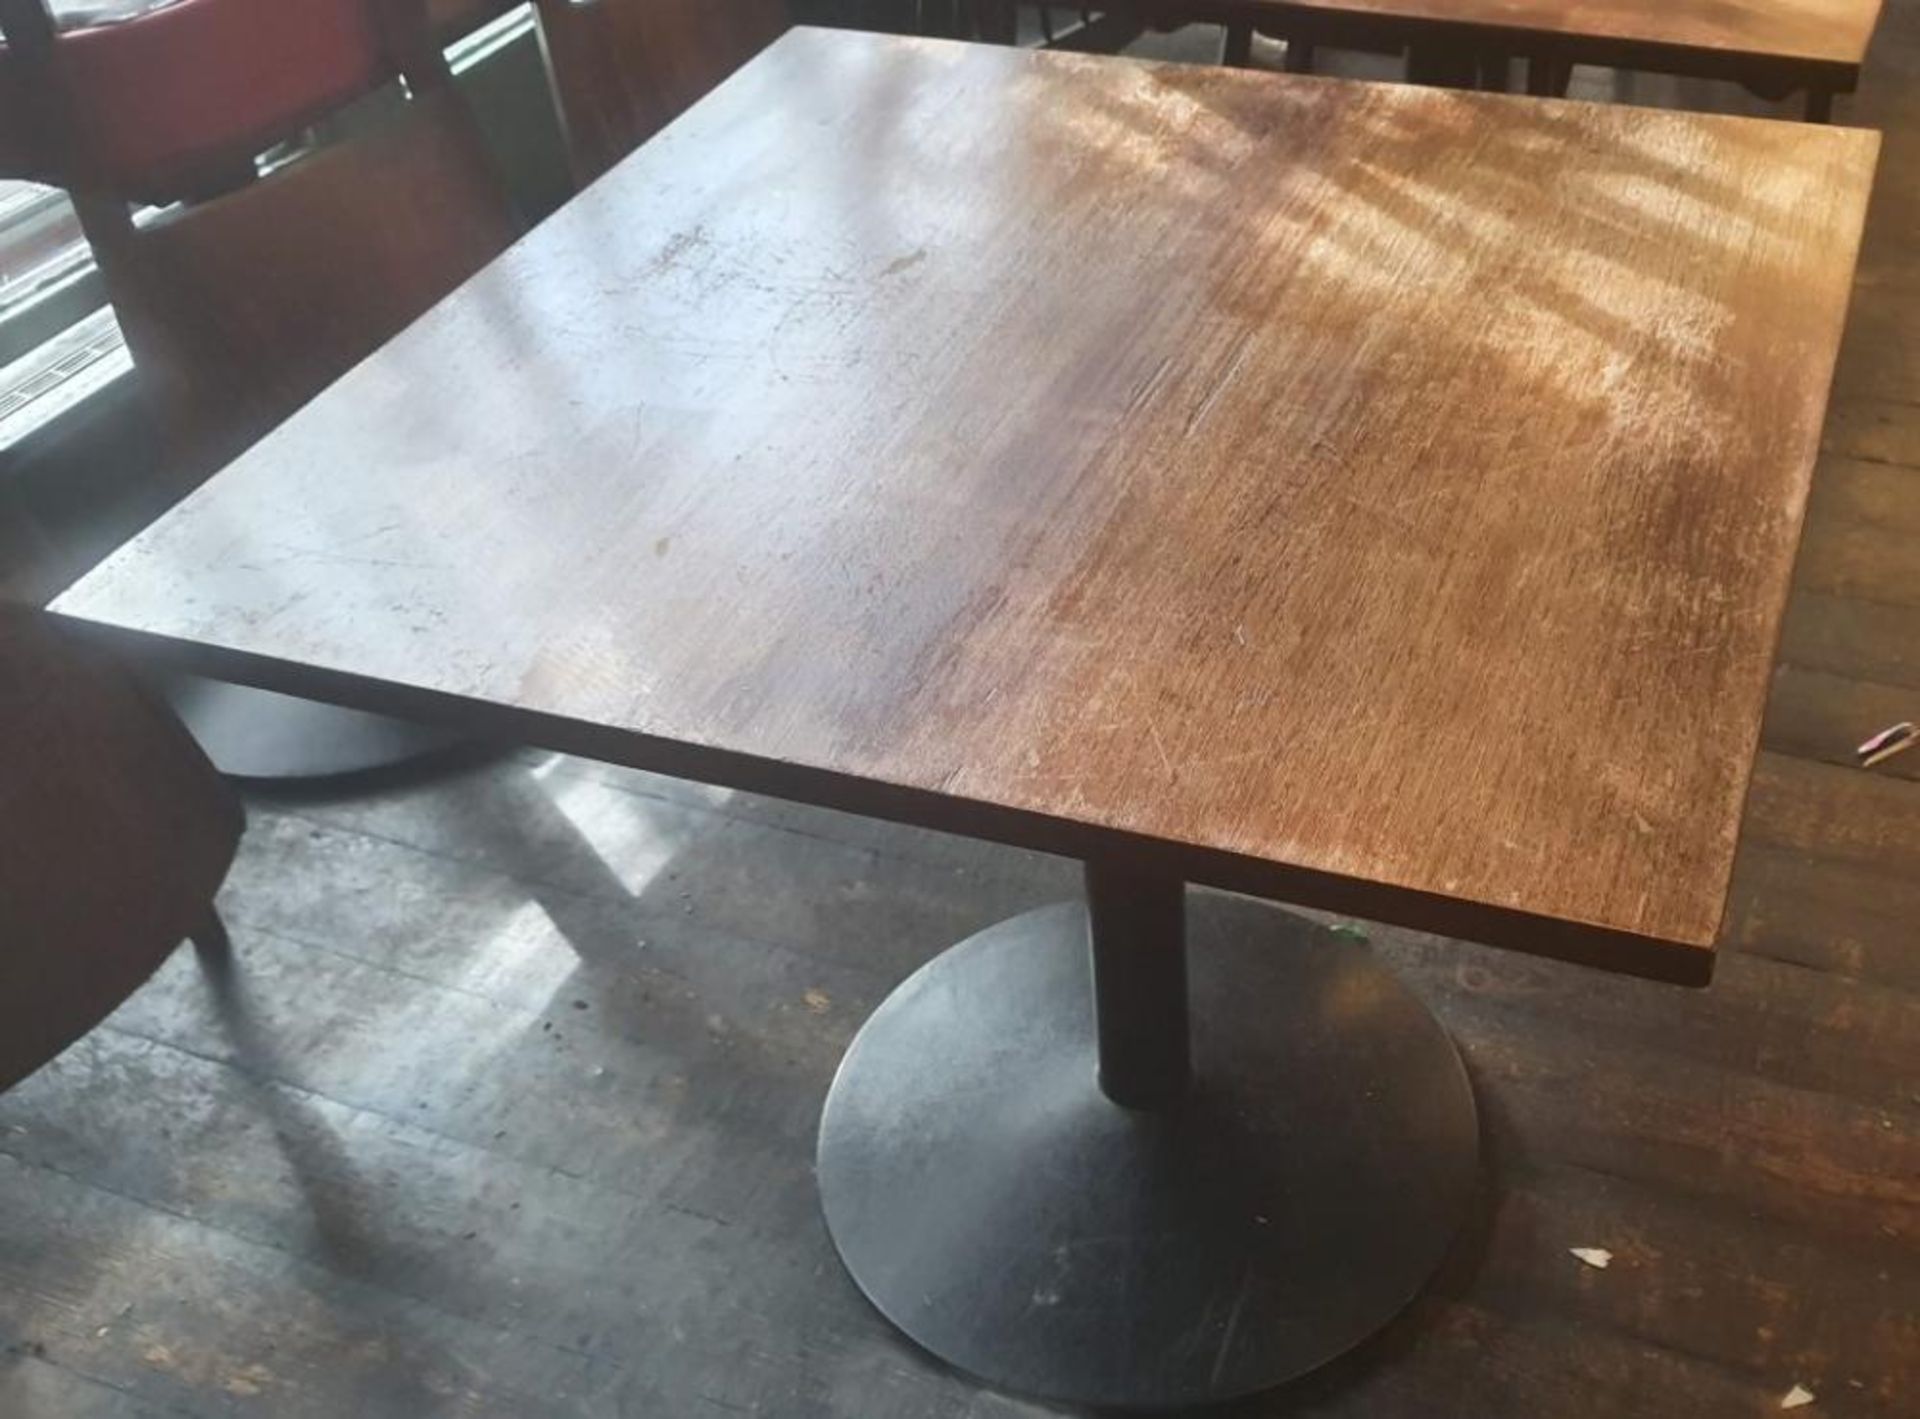 1 x Large Square Wooden Topped Bistro Table - Dimensions: 85 x 85 x H74cm - Recently Taken From A Co